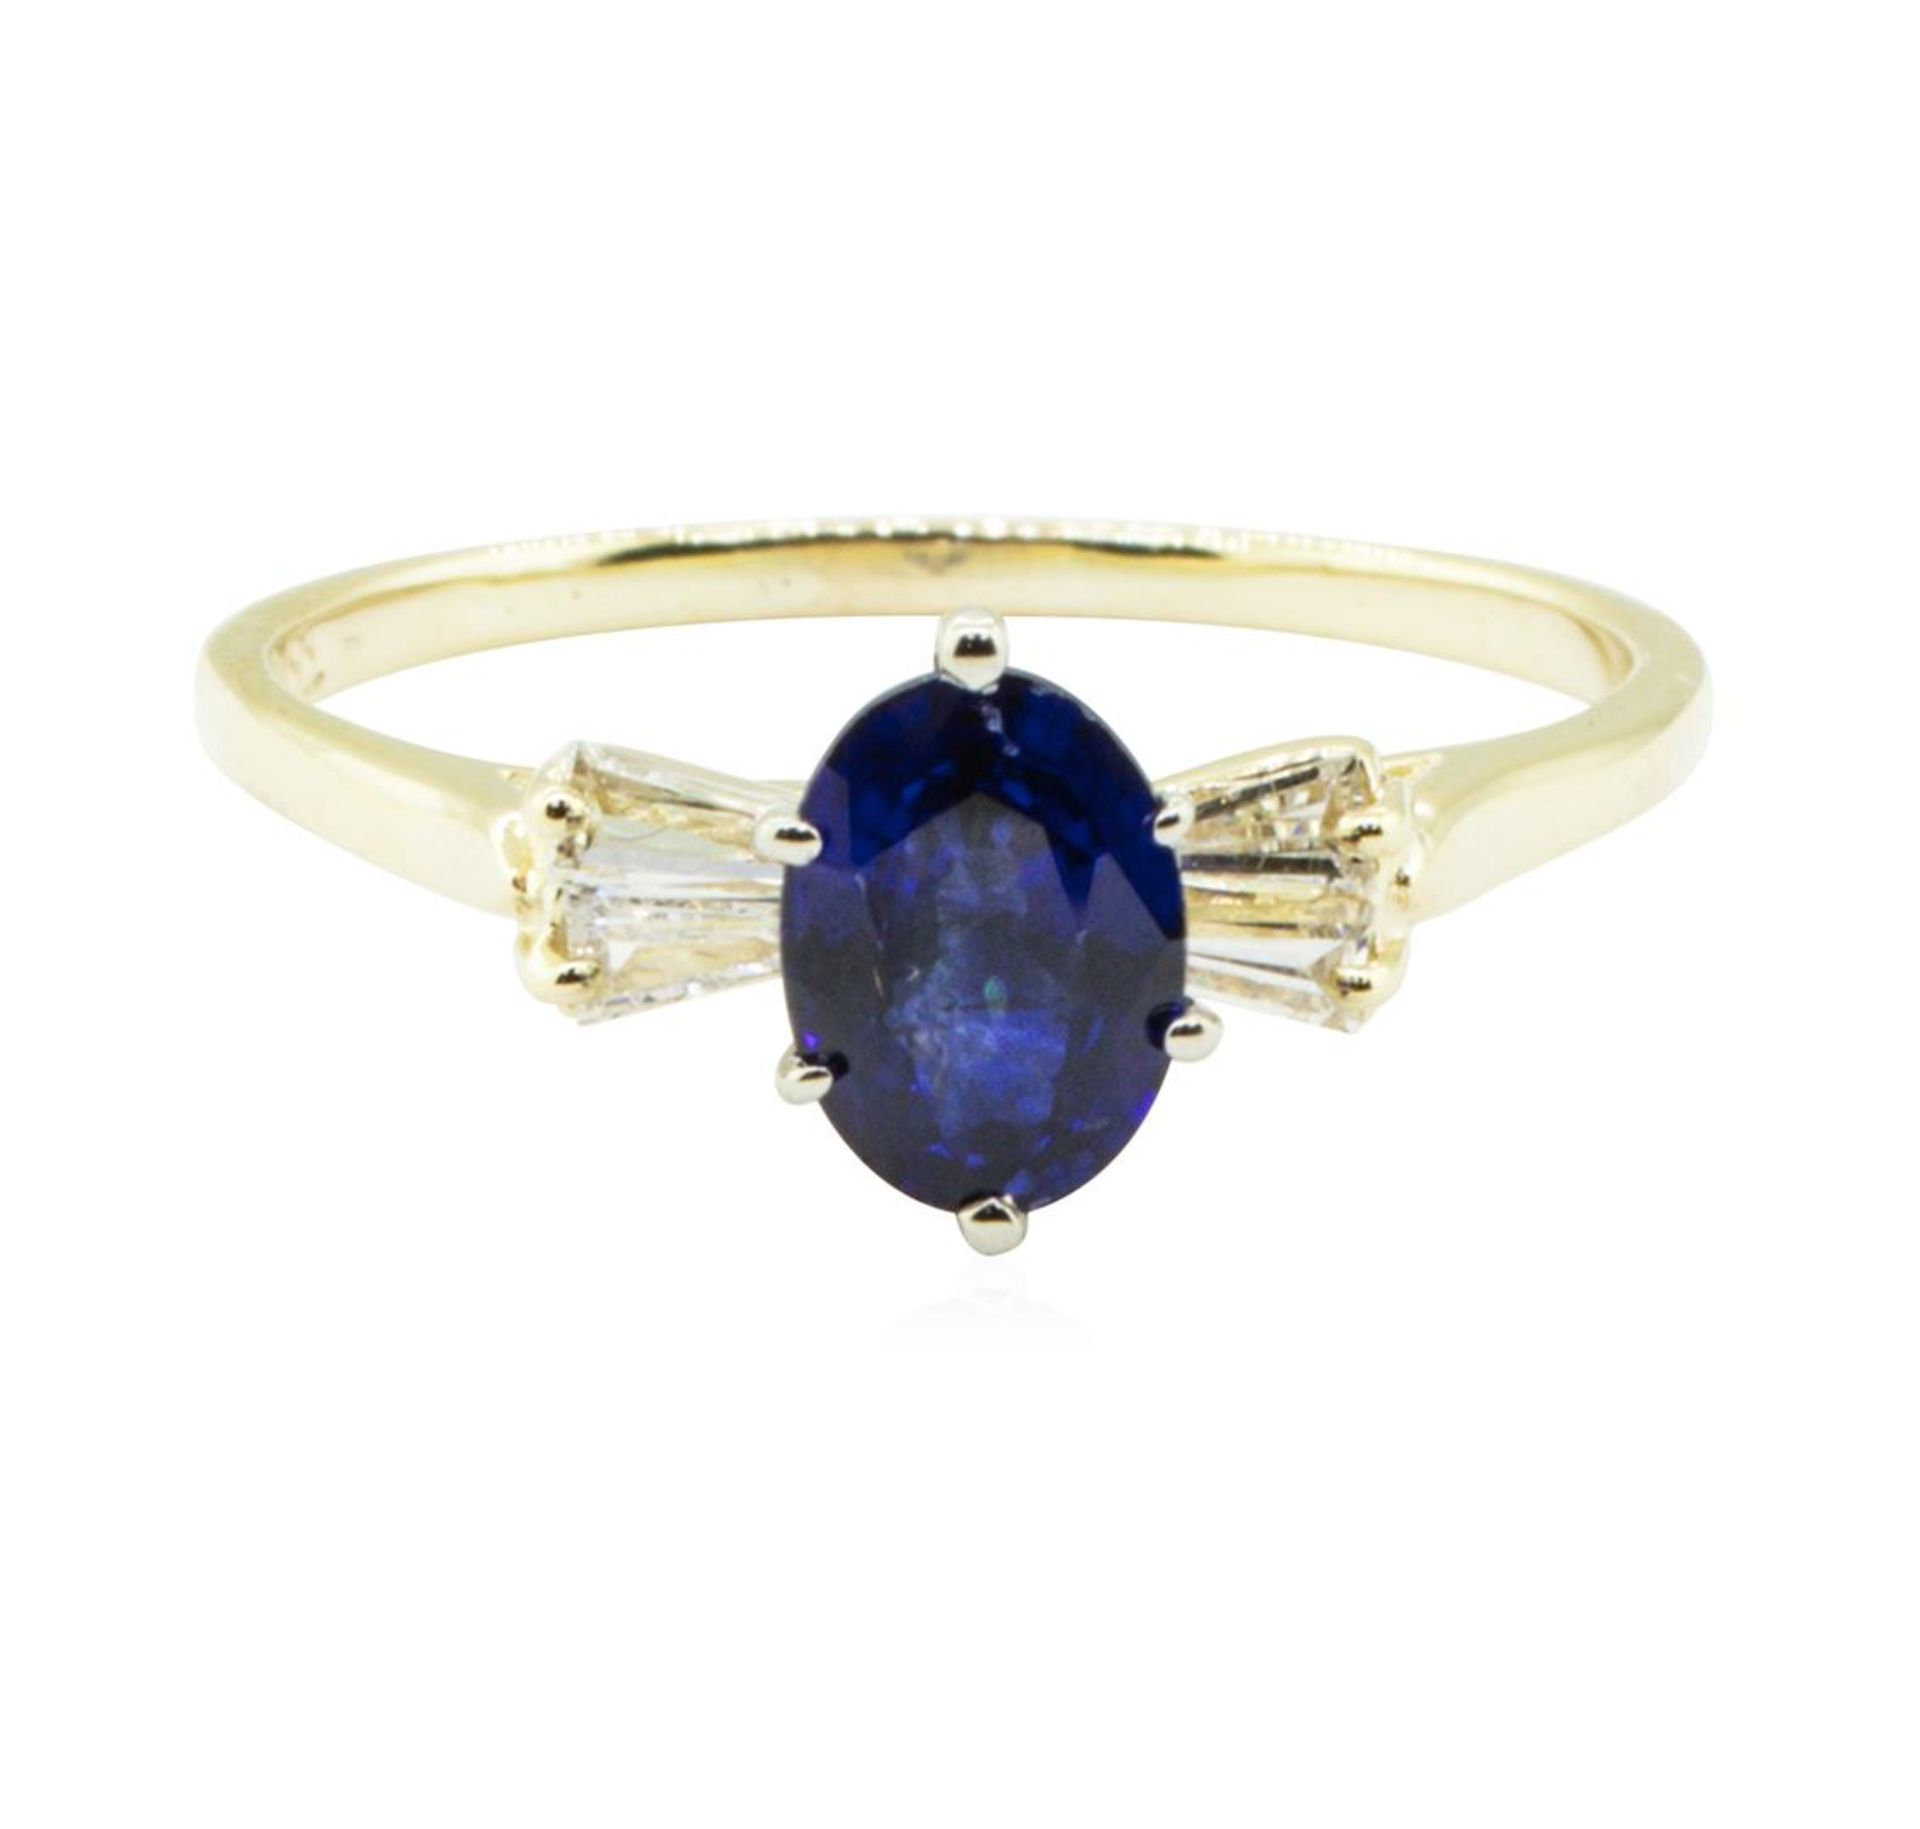 1.17ctw Blue Sapphire and Diamond Ring - 14KT Yellow Gold - Image 2 of 4